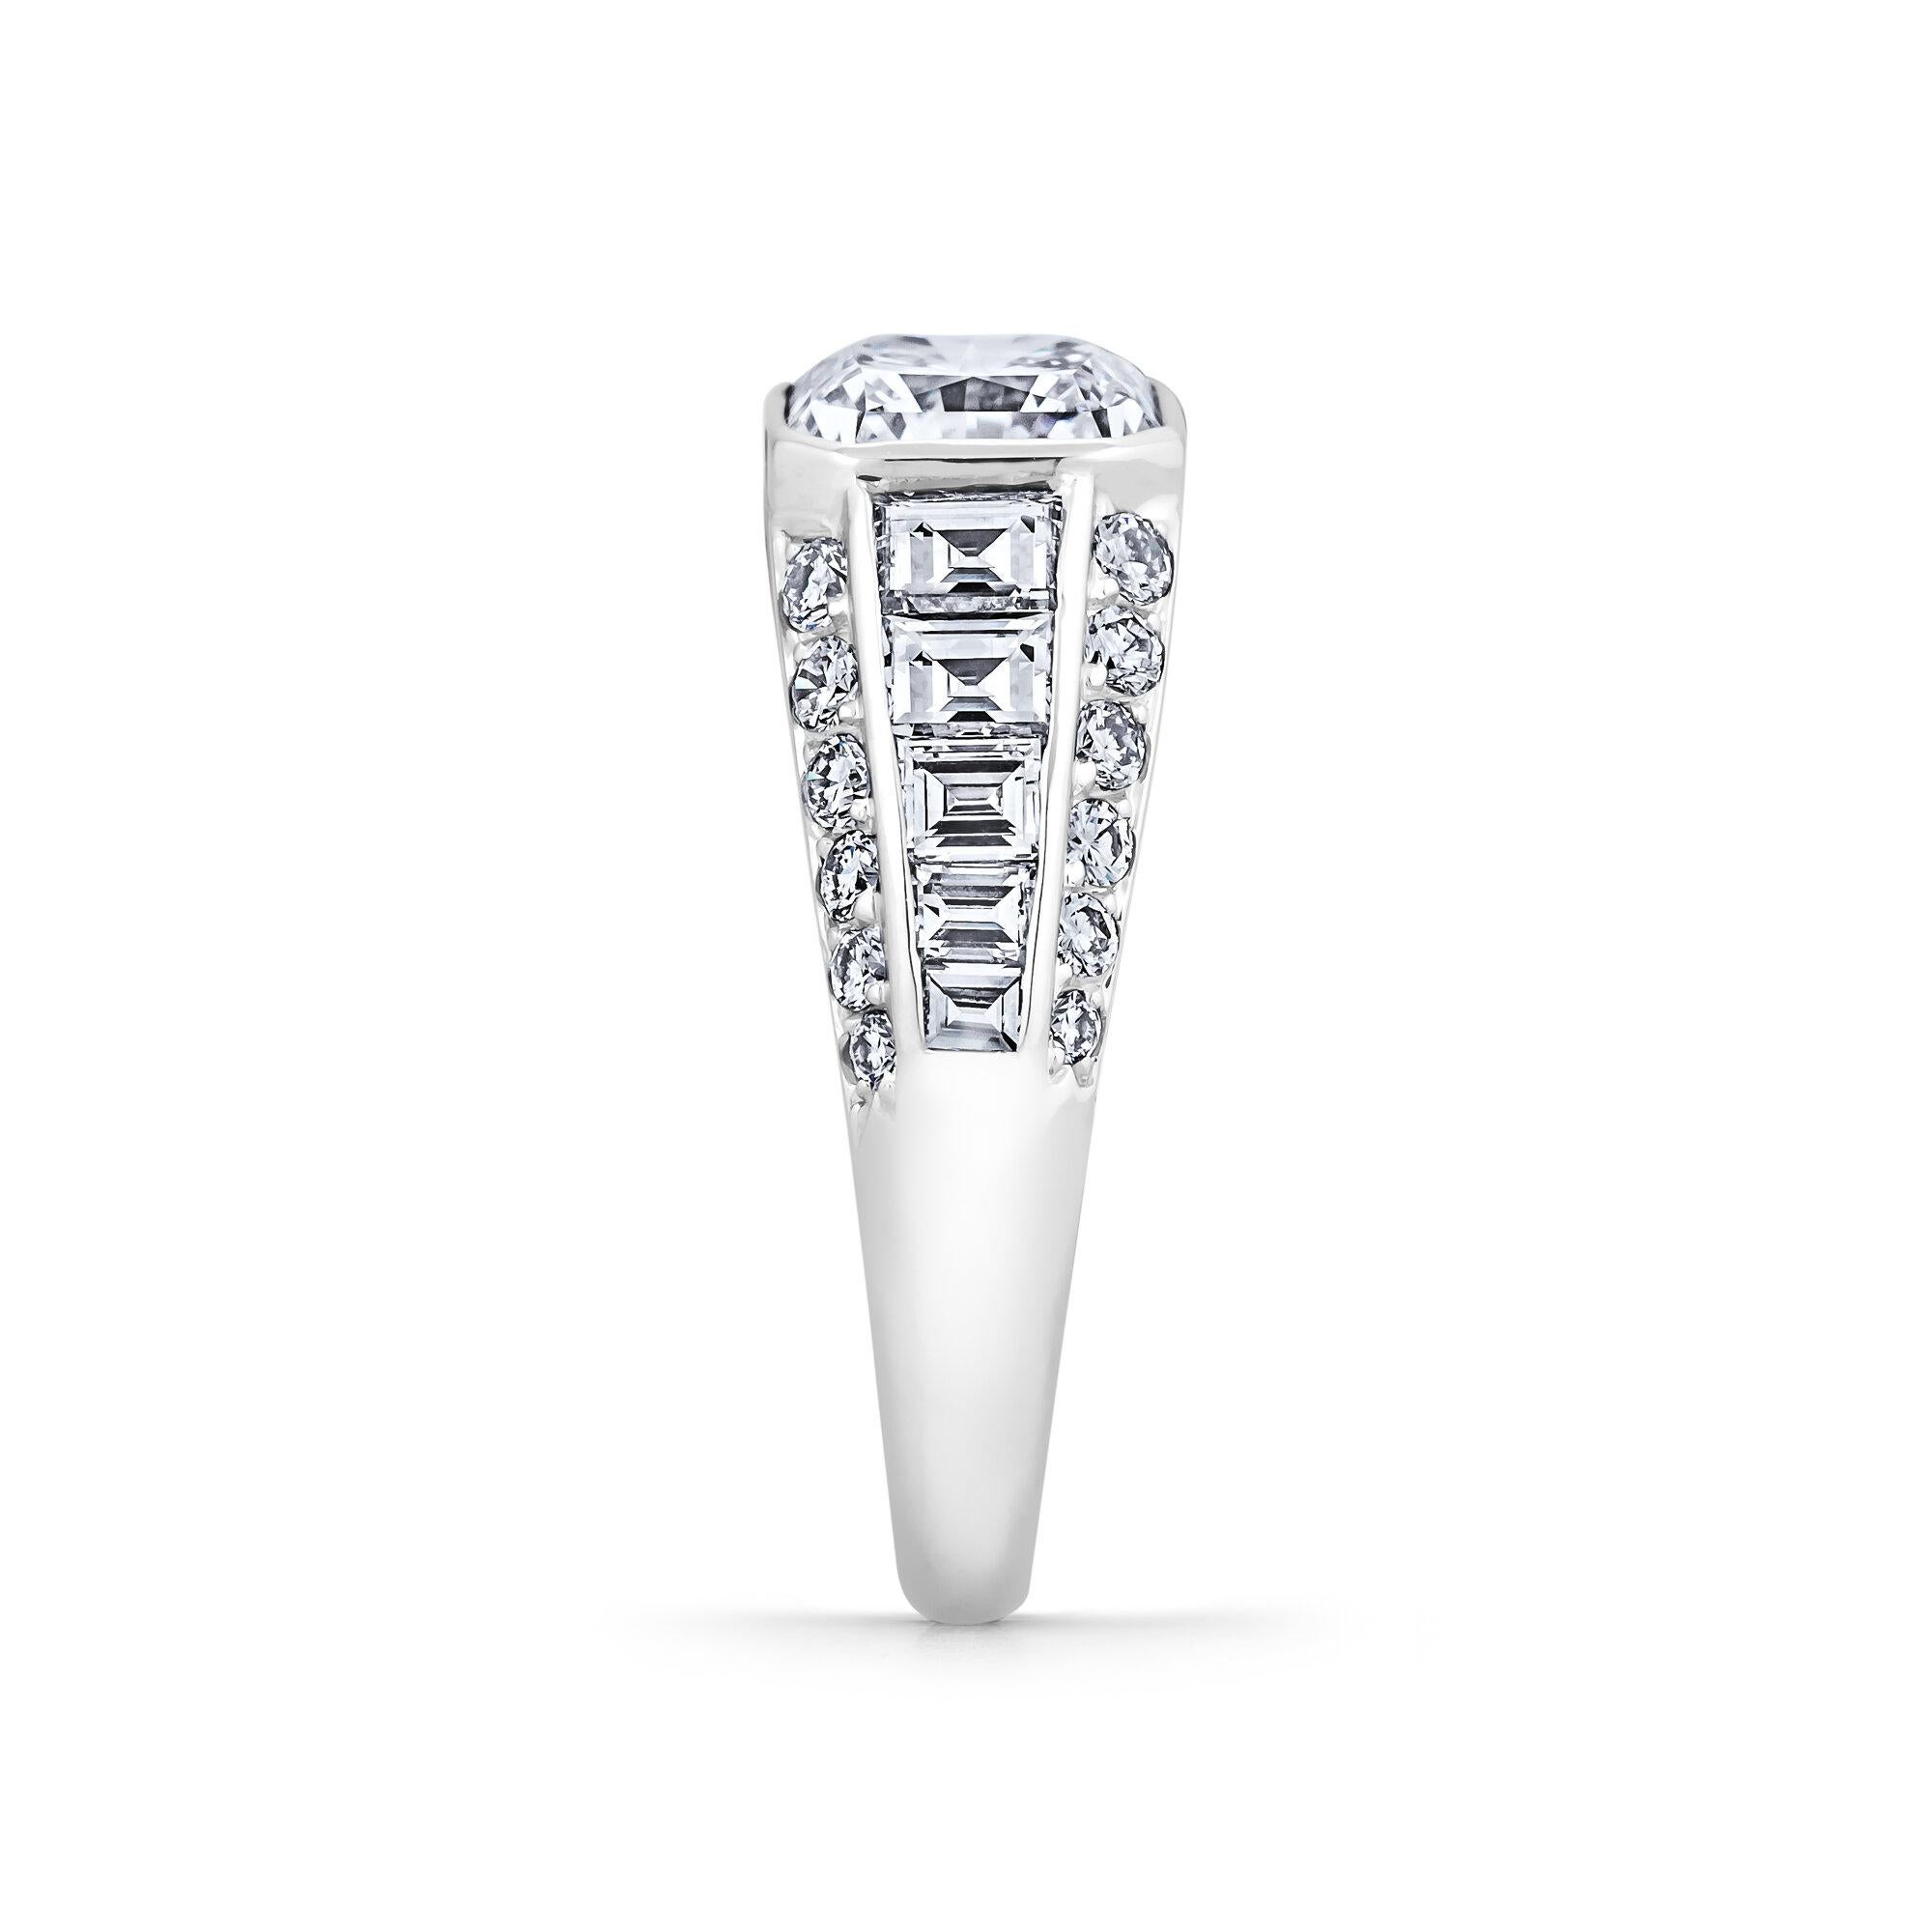 A vibrant 2.69 square radiant cut diamond is the striking centerpiece of this extraordinary Bulgari ring. Surrounded by a total of 1.00 carat of tapered baguette and round cut diamonds mounted in platinum, this extraordinary bombe styled ring will